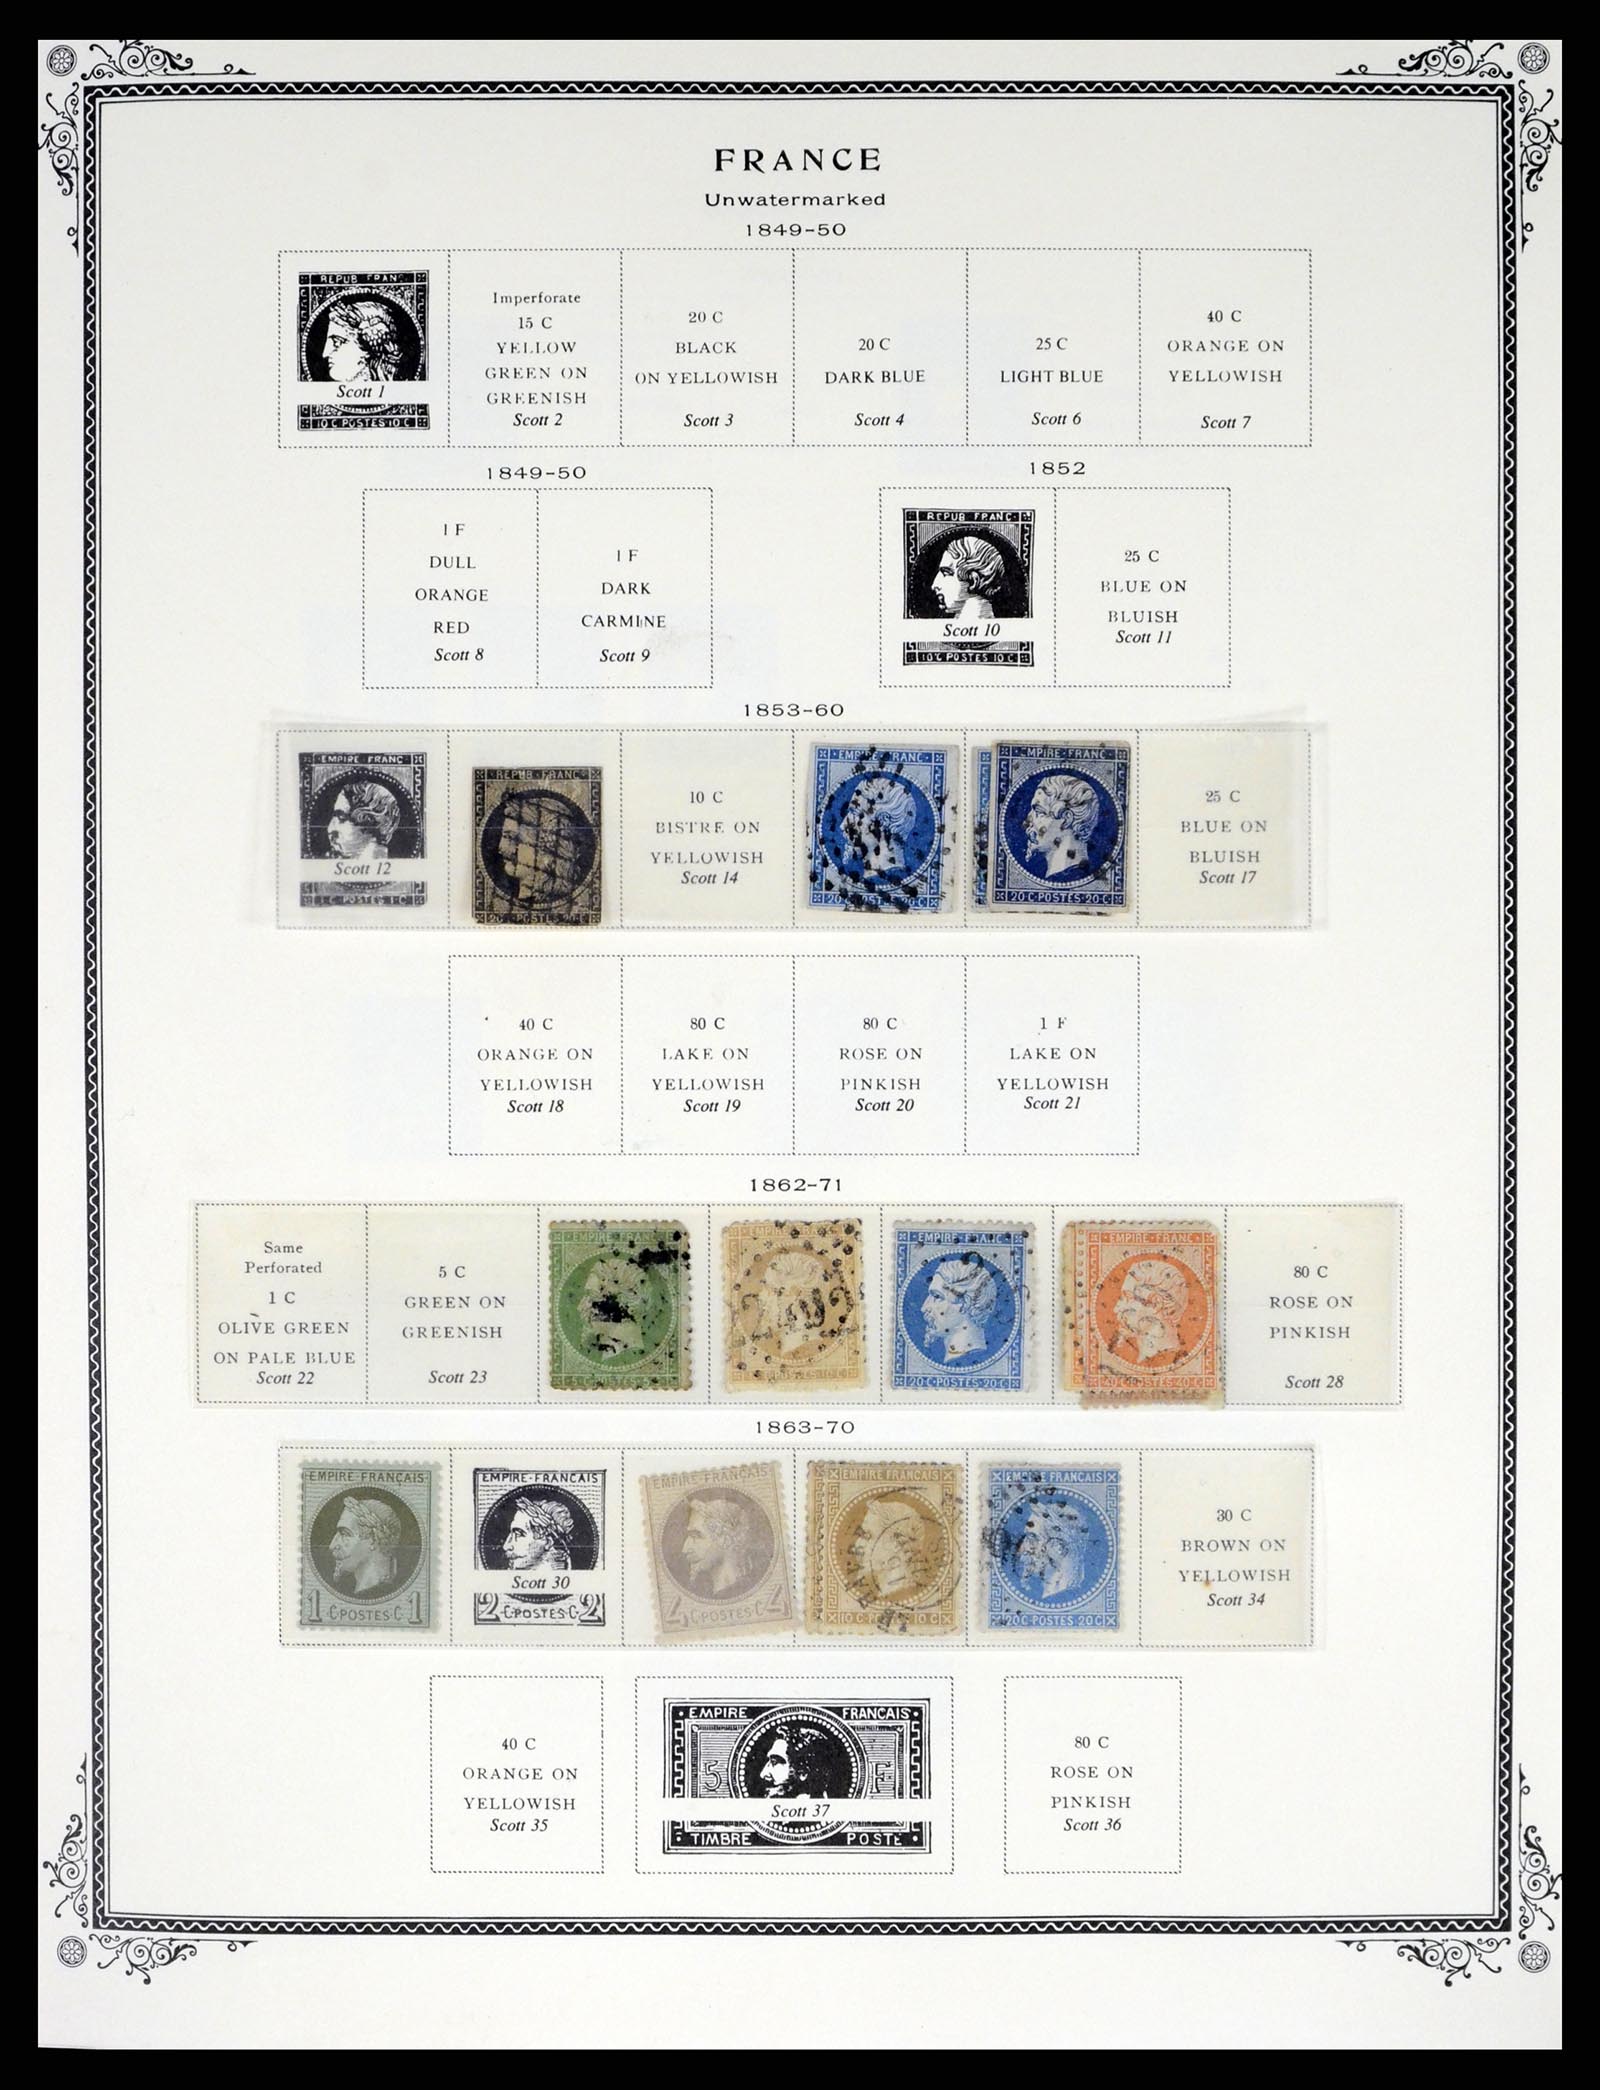 37632 001 - Stamp collection 37632 France 1849-2001.